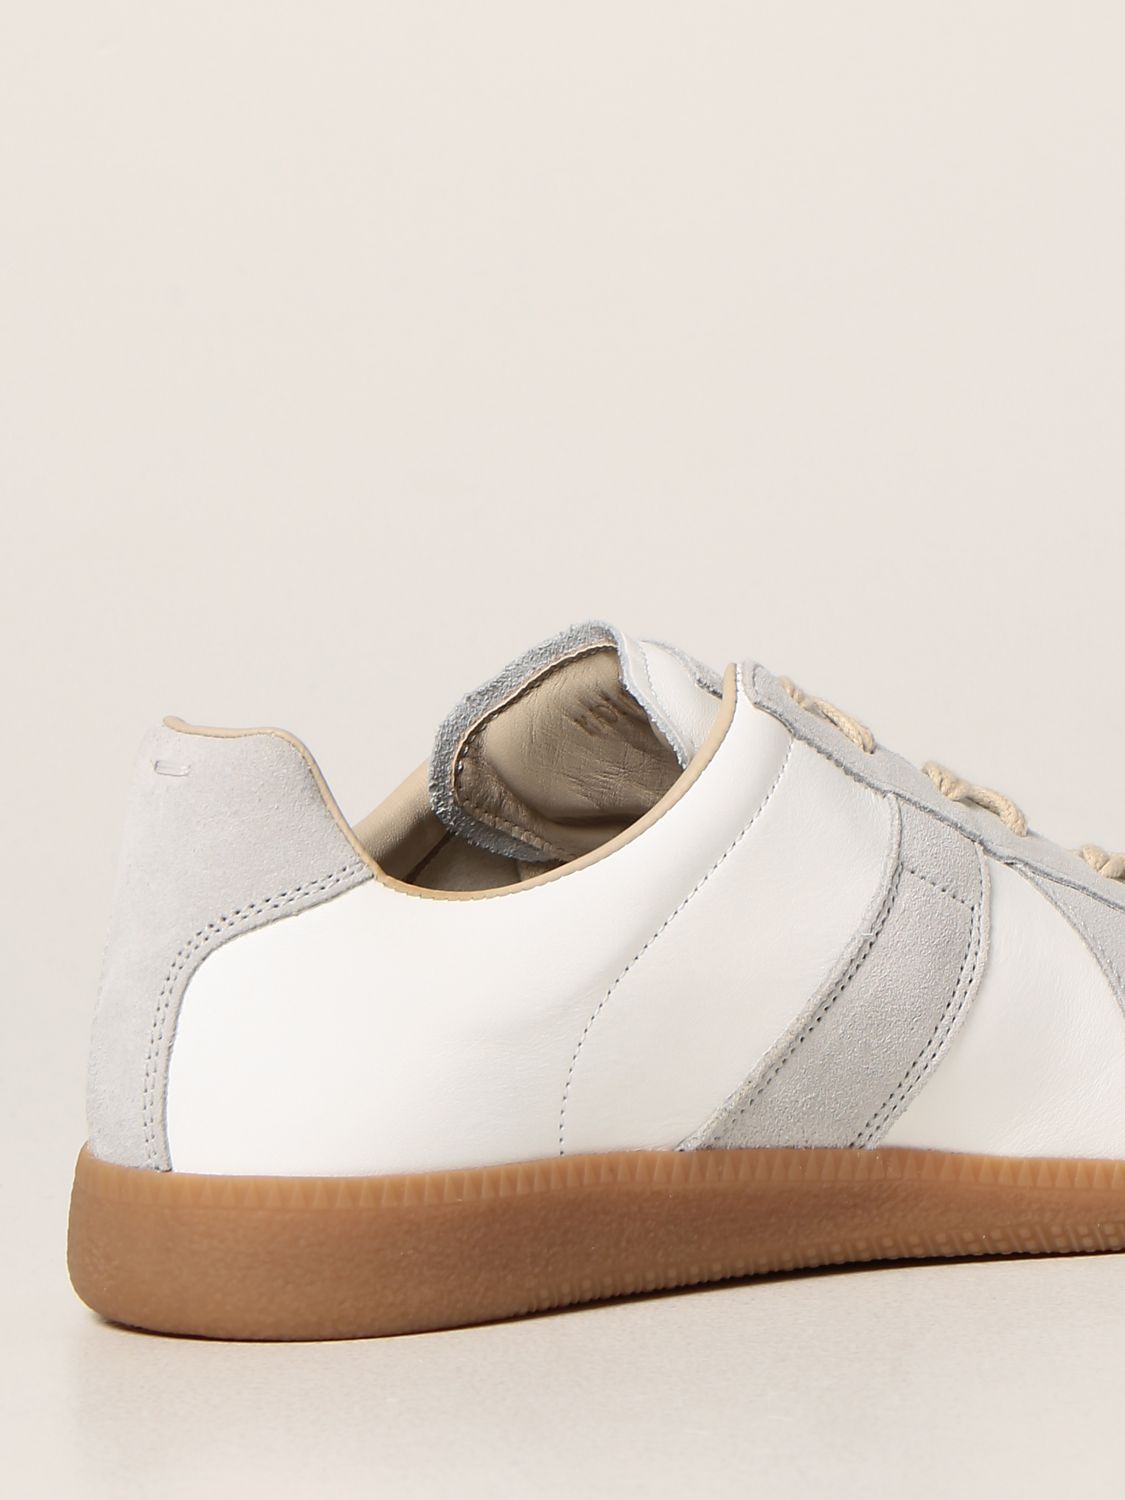 MARGIELA: Replica suede and leather sneakers - White | Maison sneakers online on GIGLIO.COM